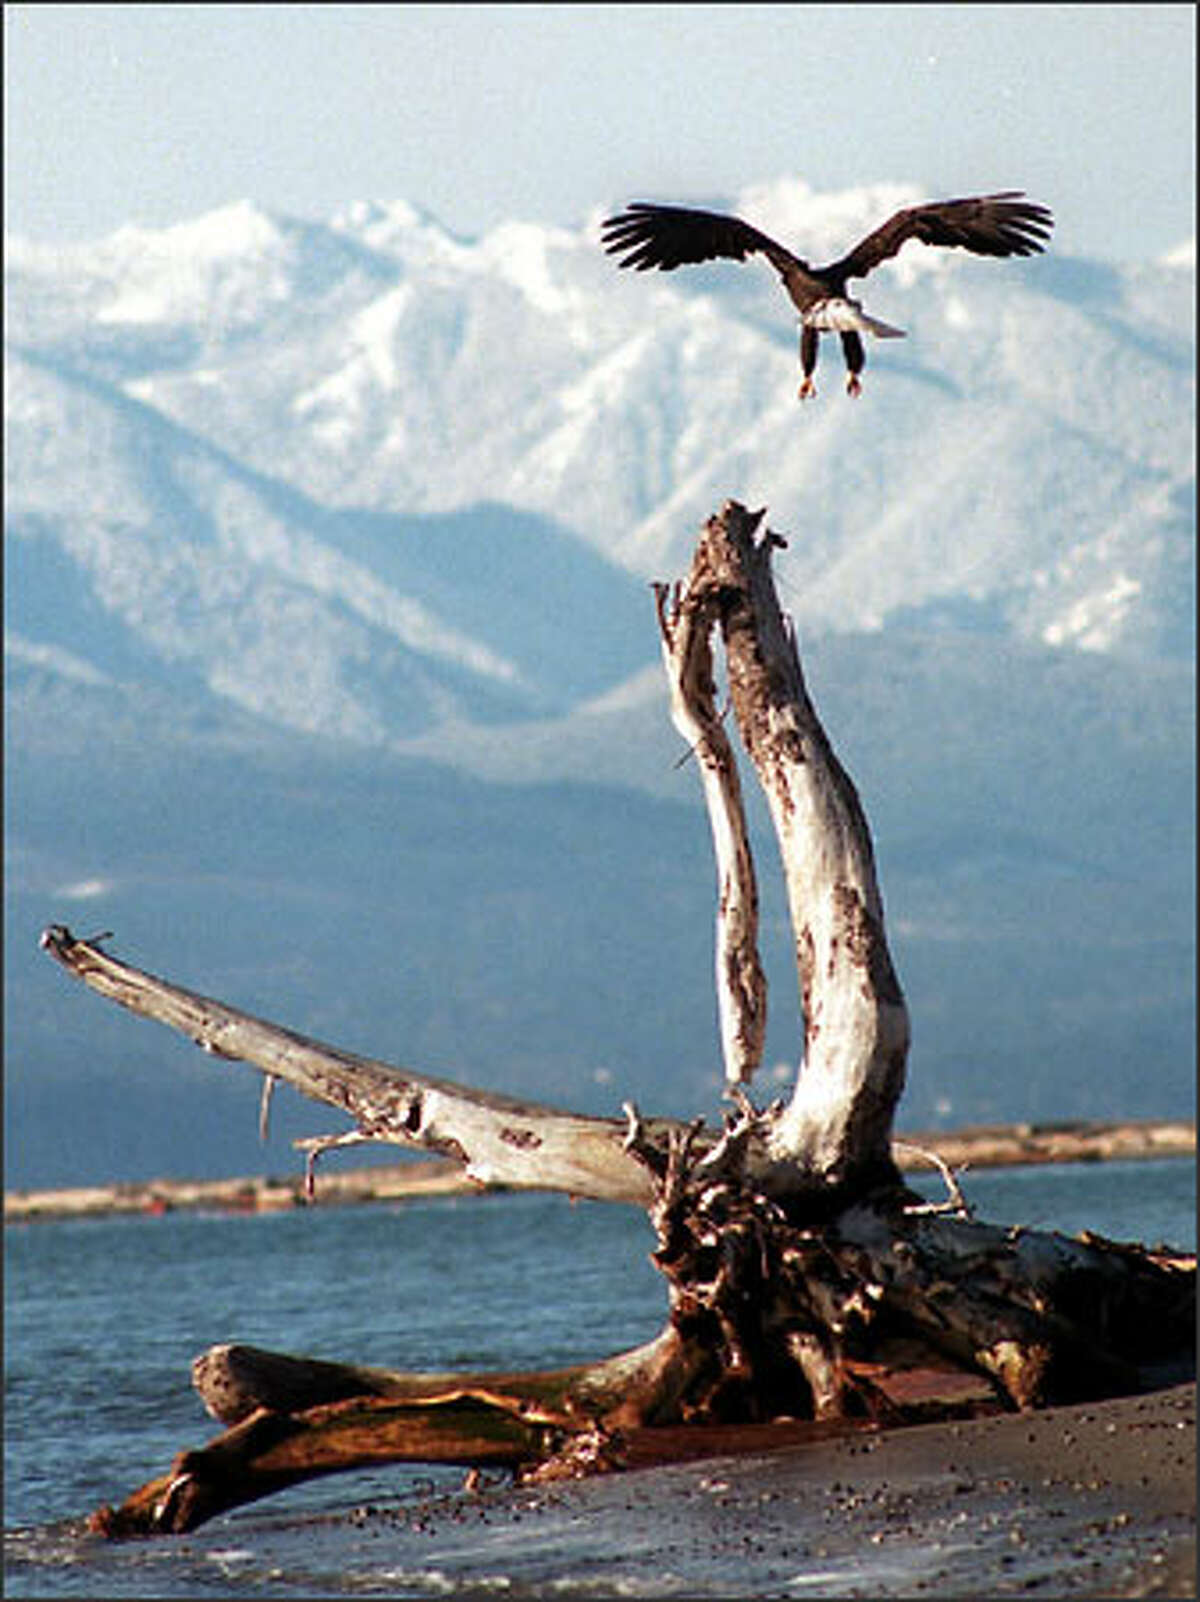 A bald eagle gets ready to land on a tree stump on the beach next to the Lighthouse at Dungeness Spit.